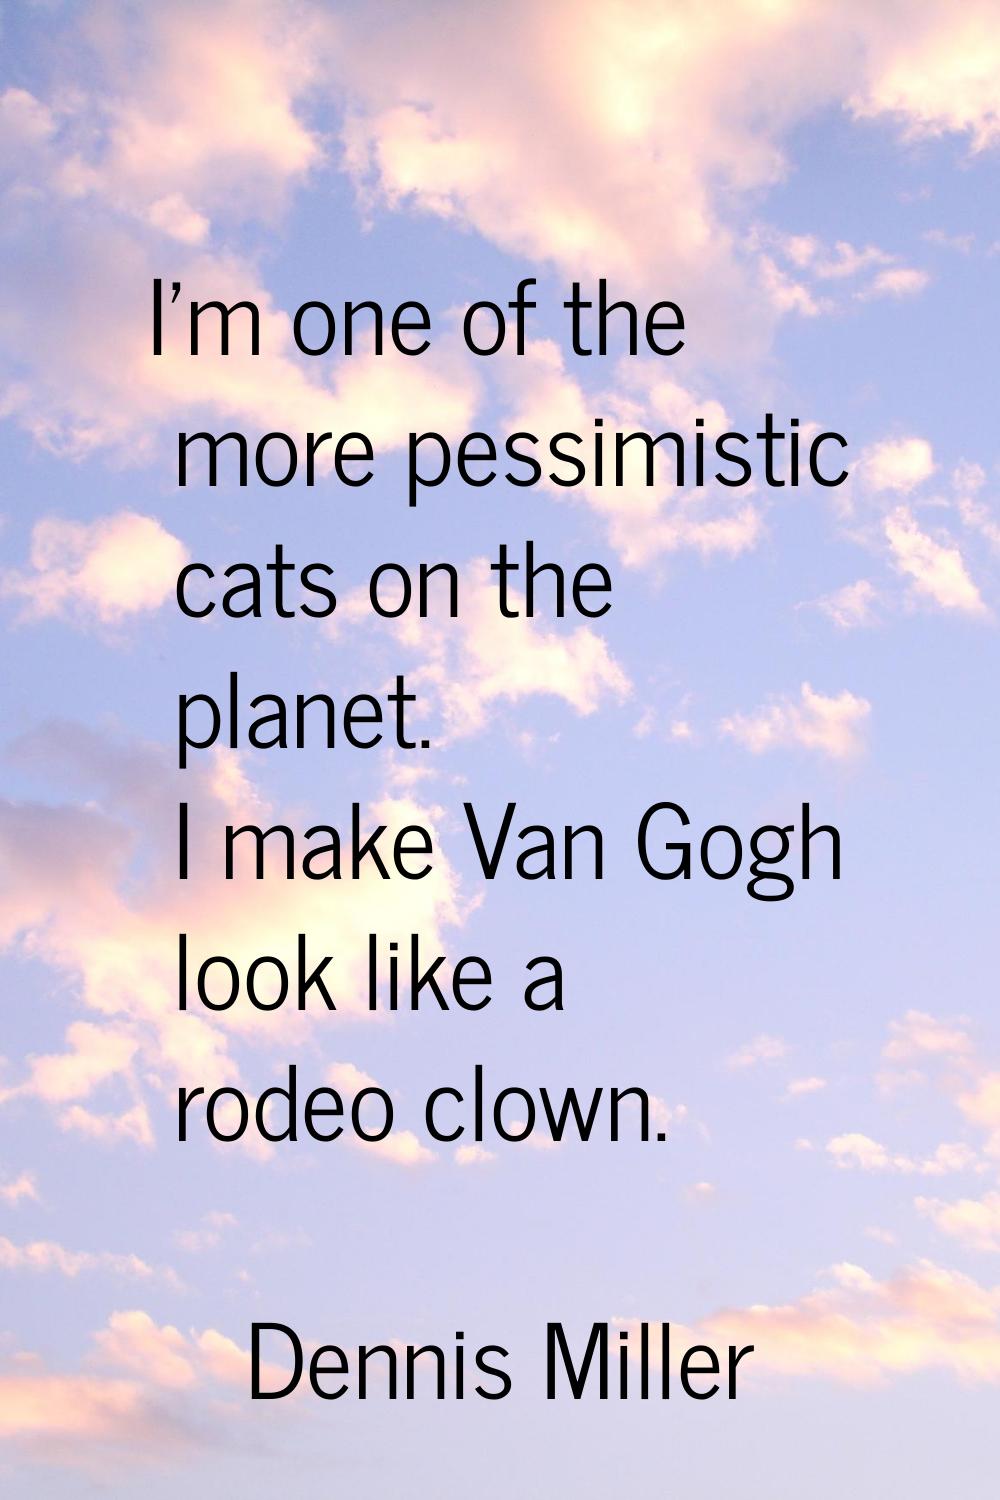 I'm one of the more pessimistic cats on the planet. I make Van Gogh look like a rodeo clown.